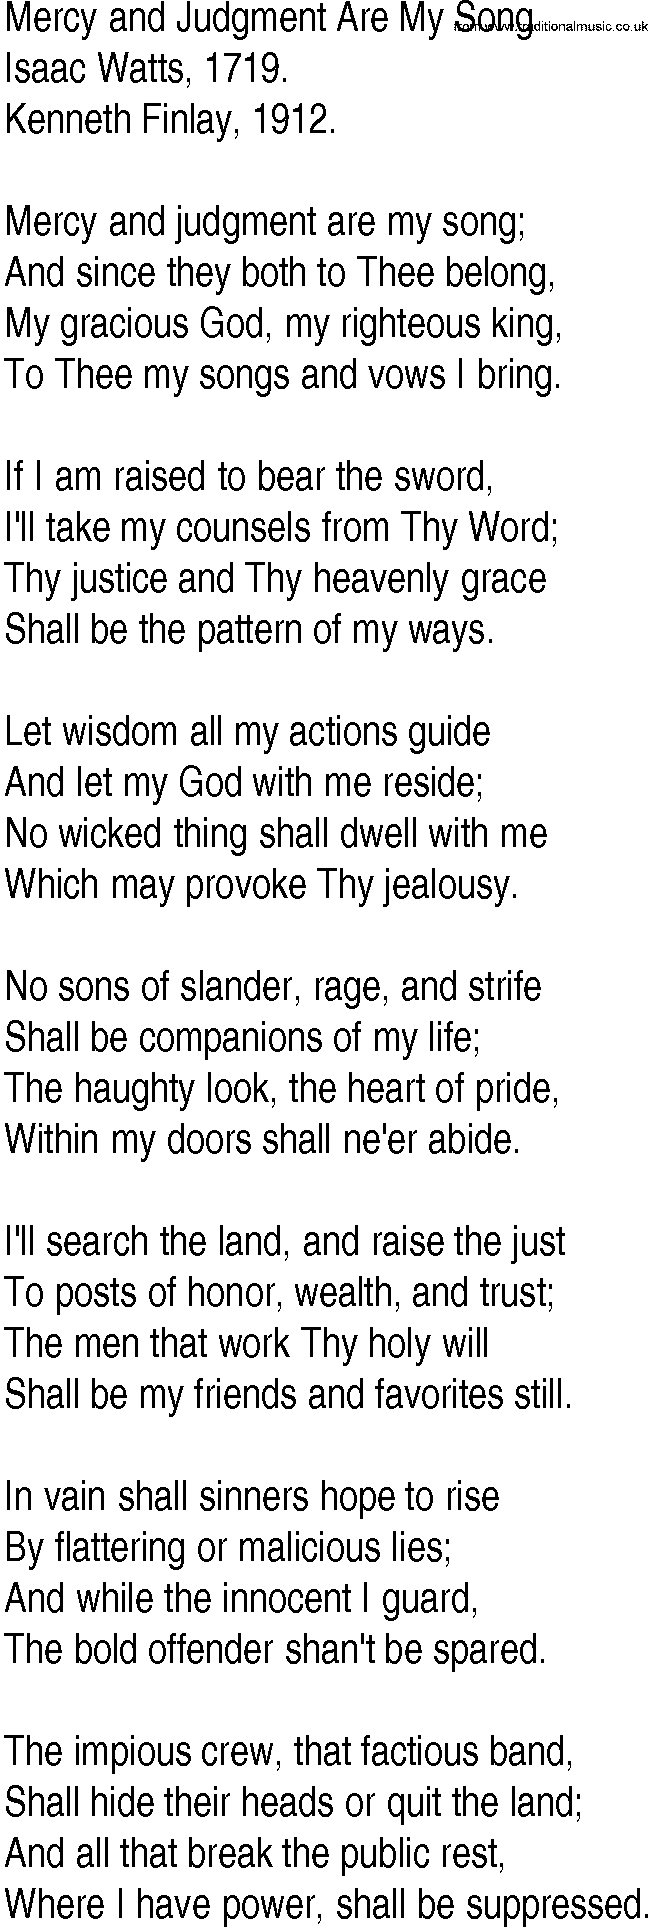 Hymn and Gospel Song: Mercy and Judgment Are My Song by Isaac Watts lyrics